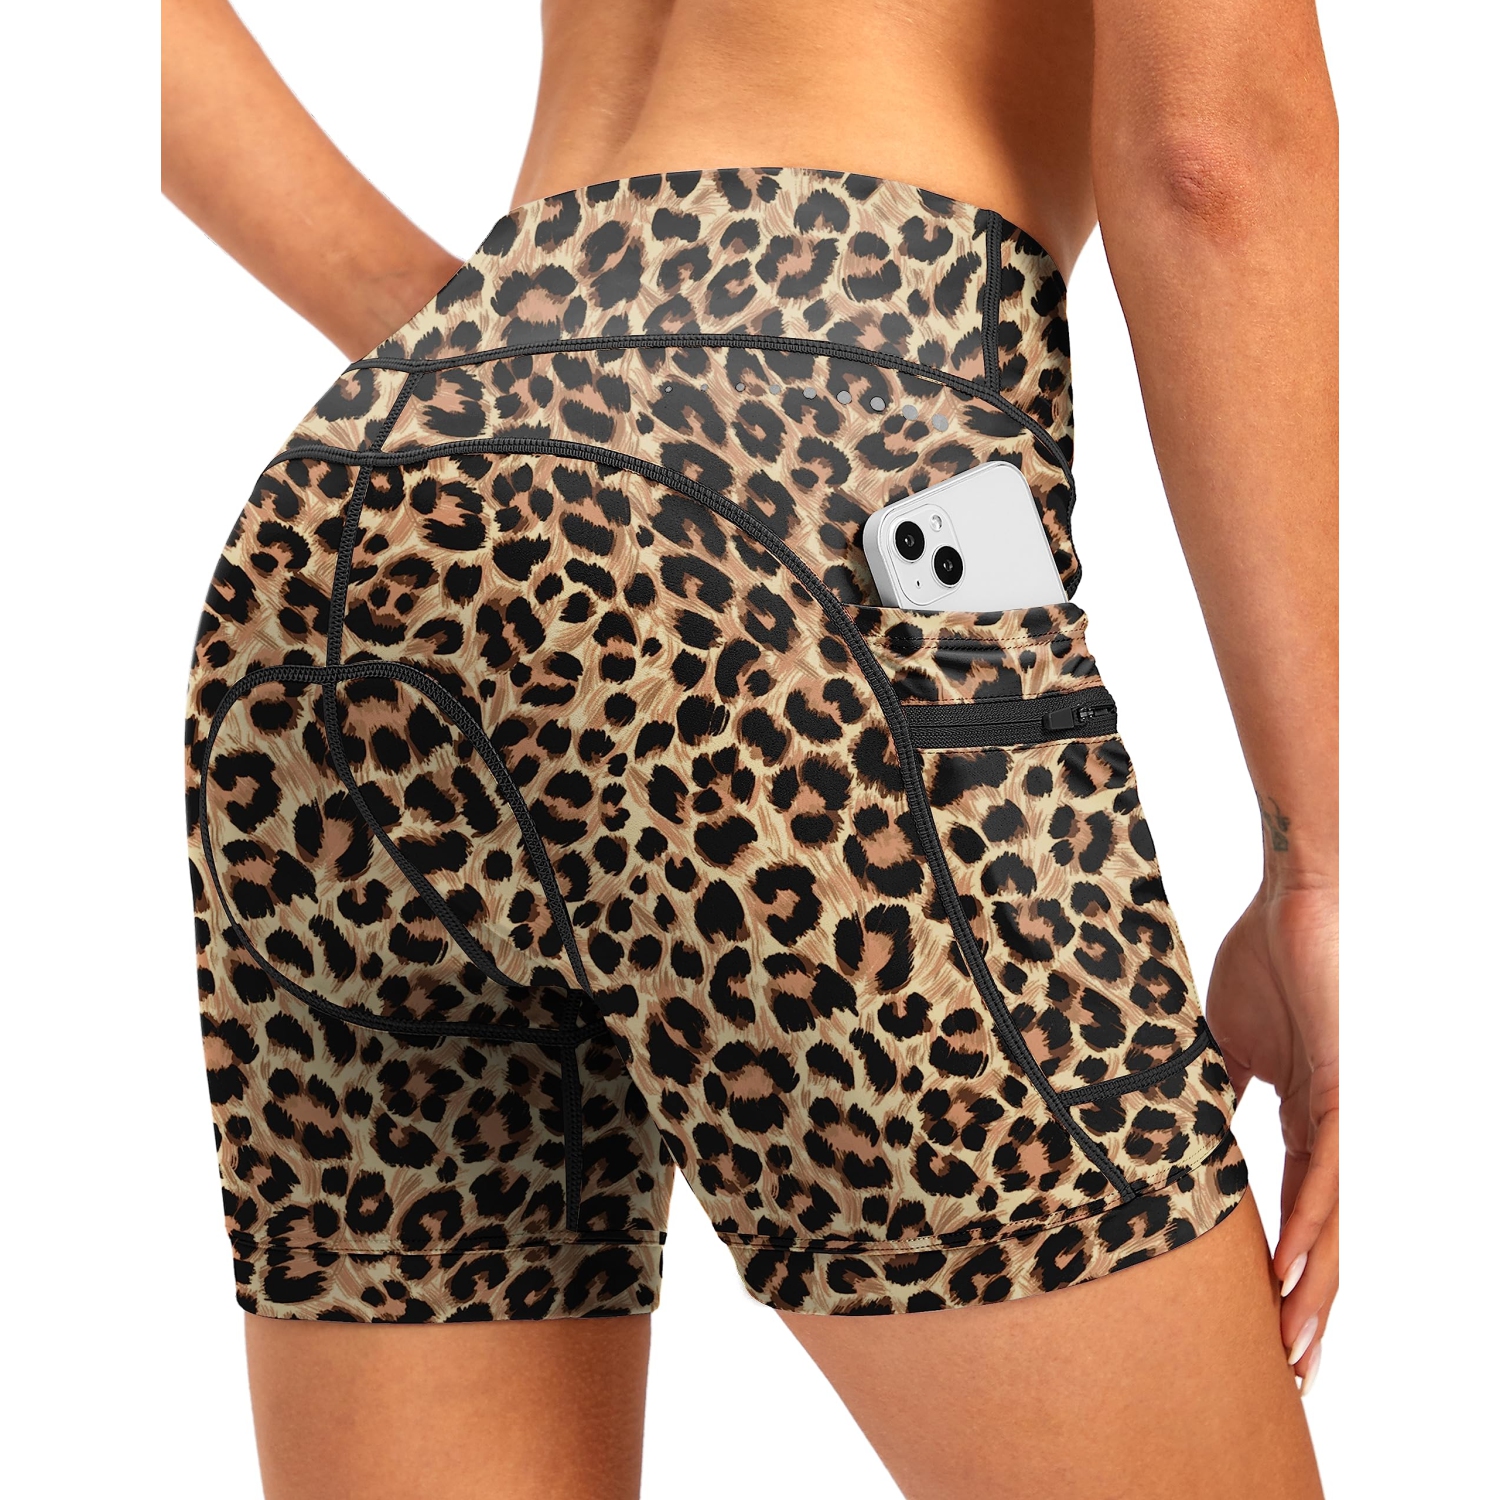 Padded cycling underwear for women - Black and blue leopard print -  Sophisticated cycling briefs to wear under your daily outfit for extra  comfort - LPRD